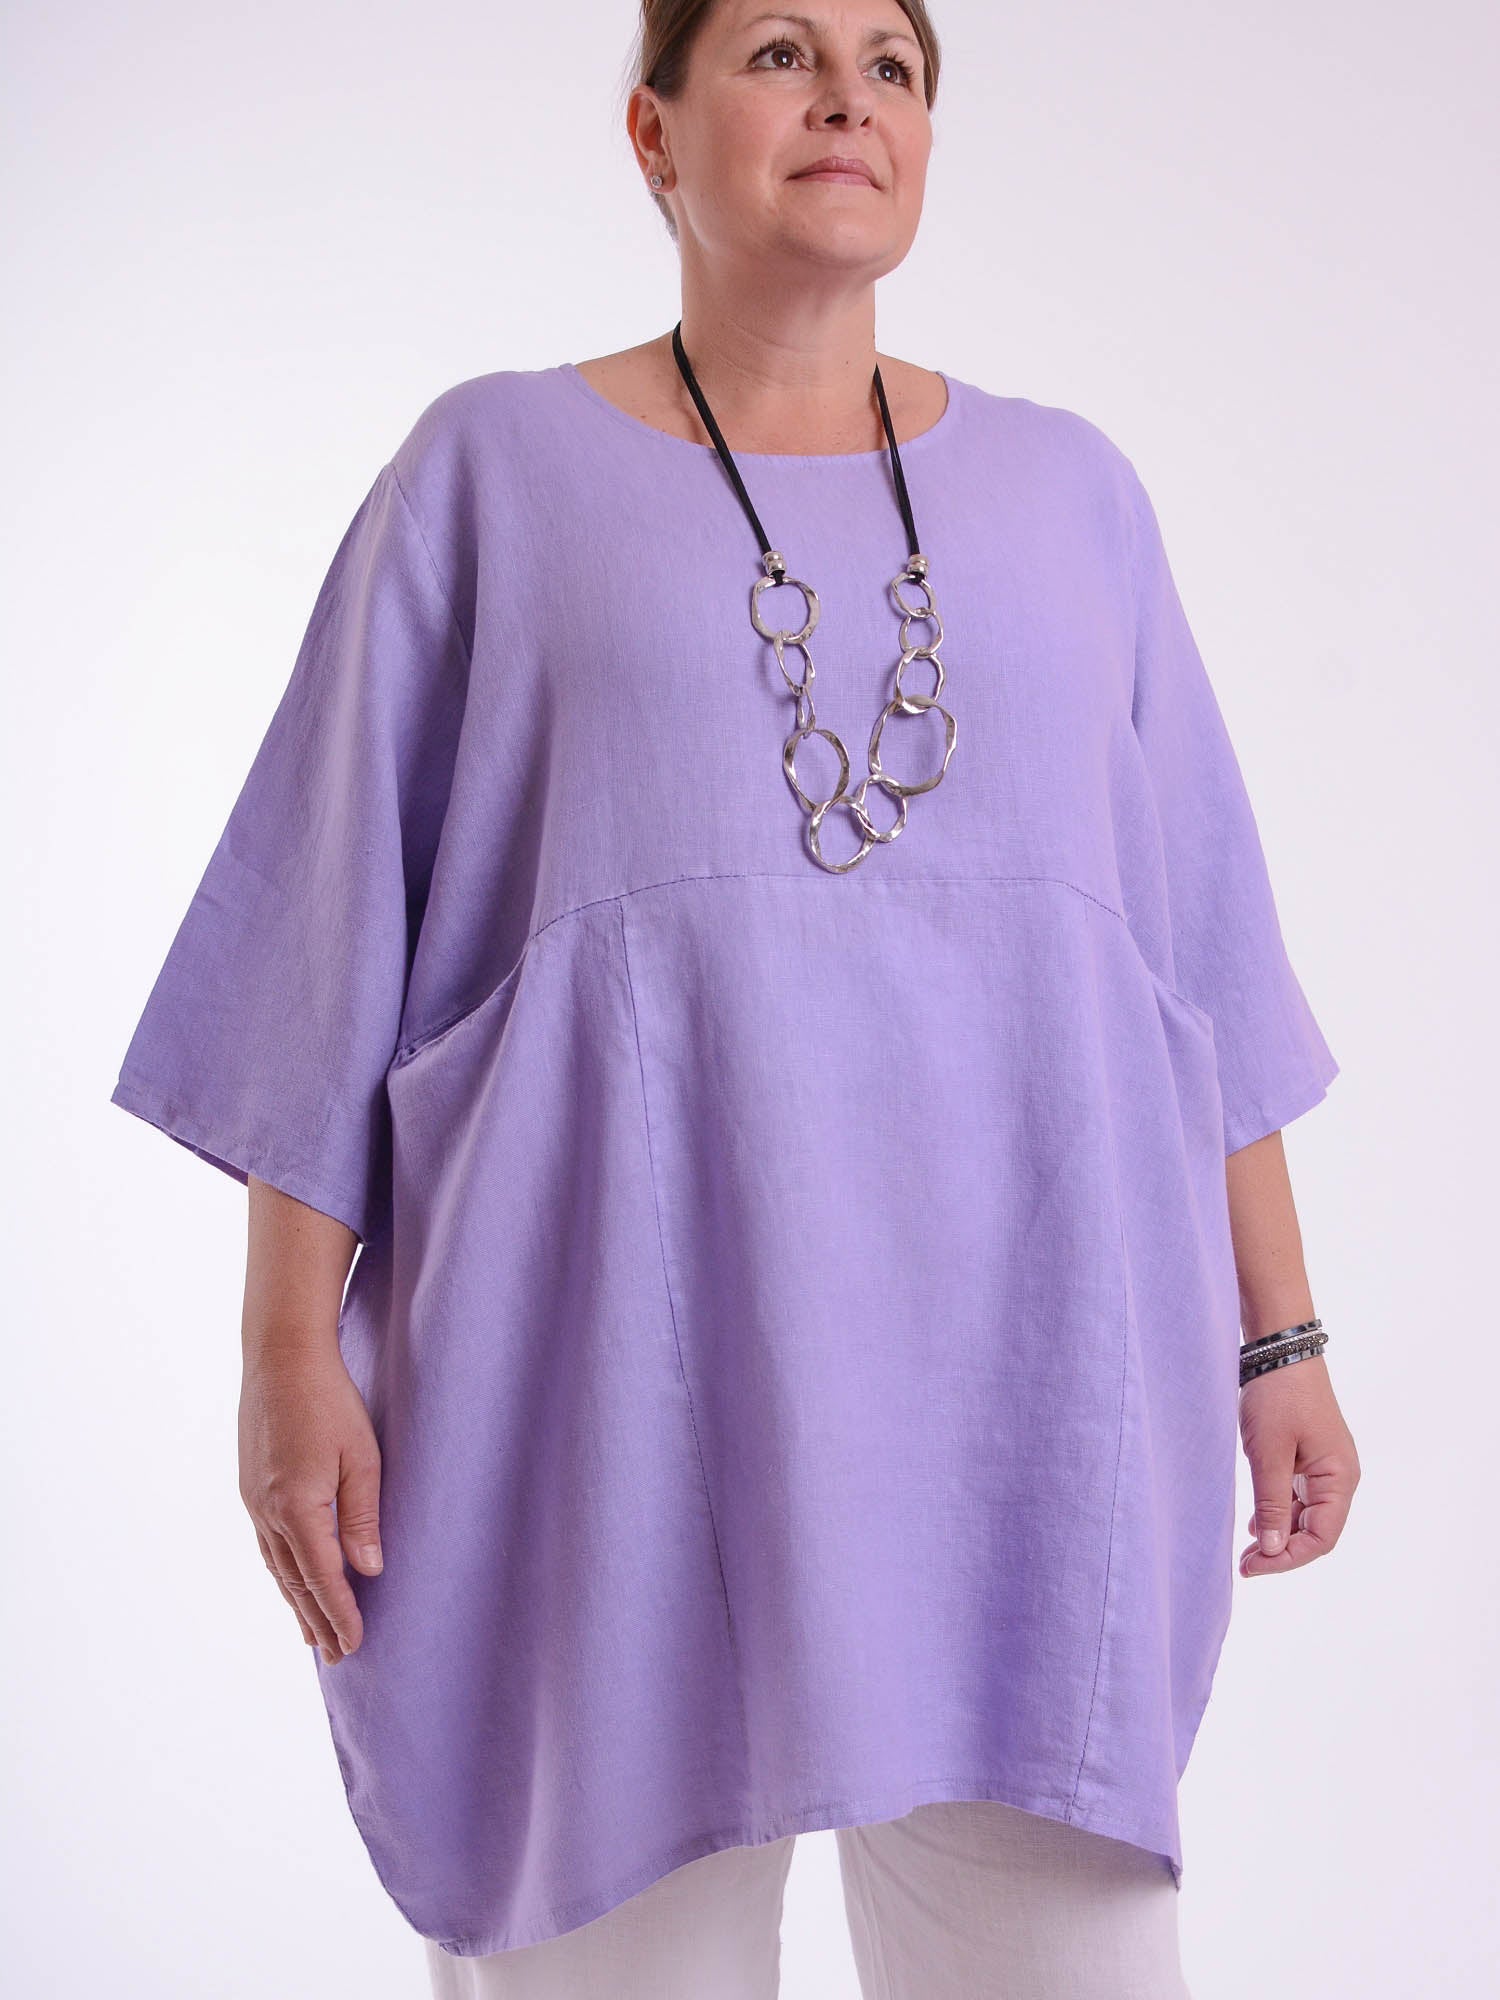 Heavy Linen Quirky Tunic - 9479, Tops & Shirts, Pure Plus Clothing, Lagenlook Clothing, Plus Size Fashion, Over 50 Fashion